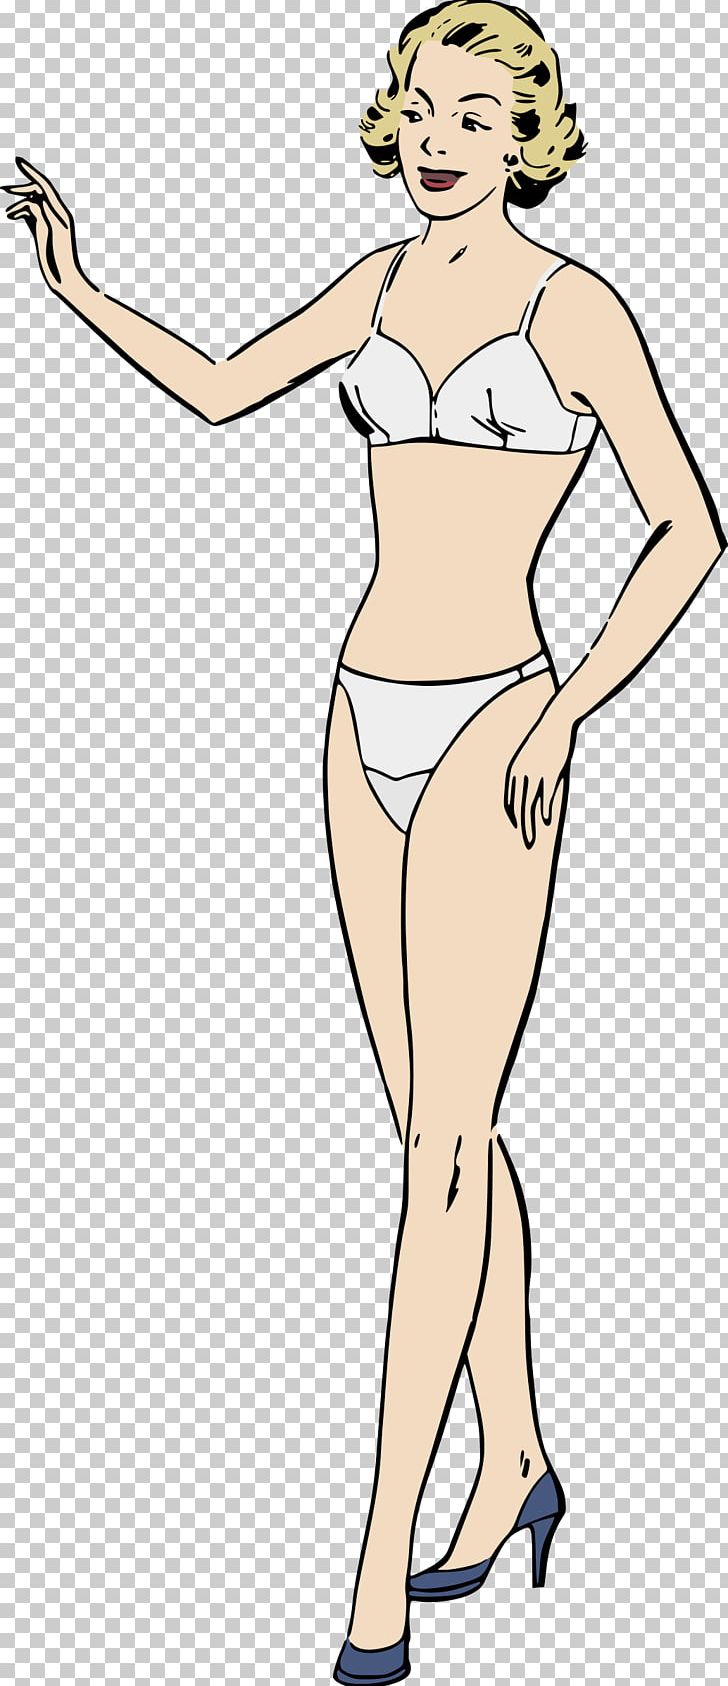 Undergarment Clothing Lingerie Woman PNG, Clipart, Abdomen, Active Undergarment, Arm, Cartoon, Clothing Accessories Free PNG Download